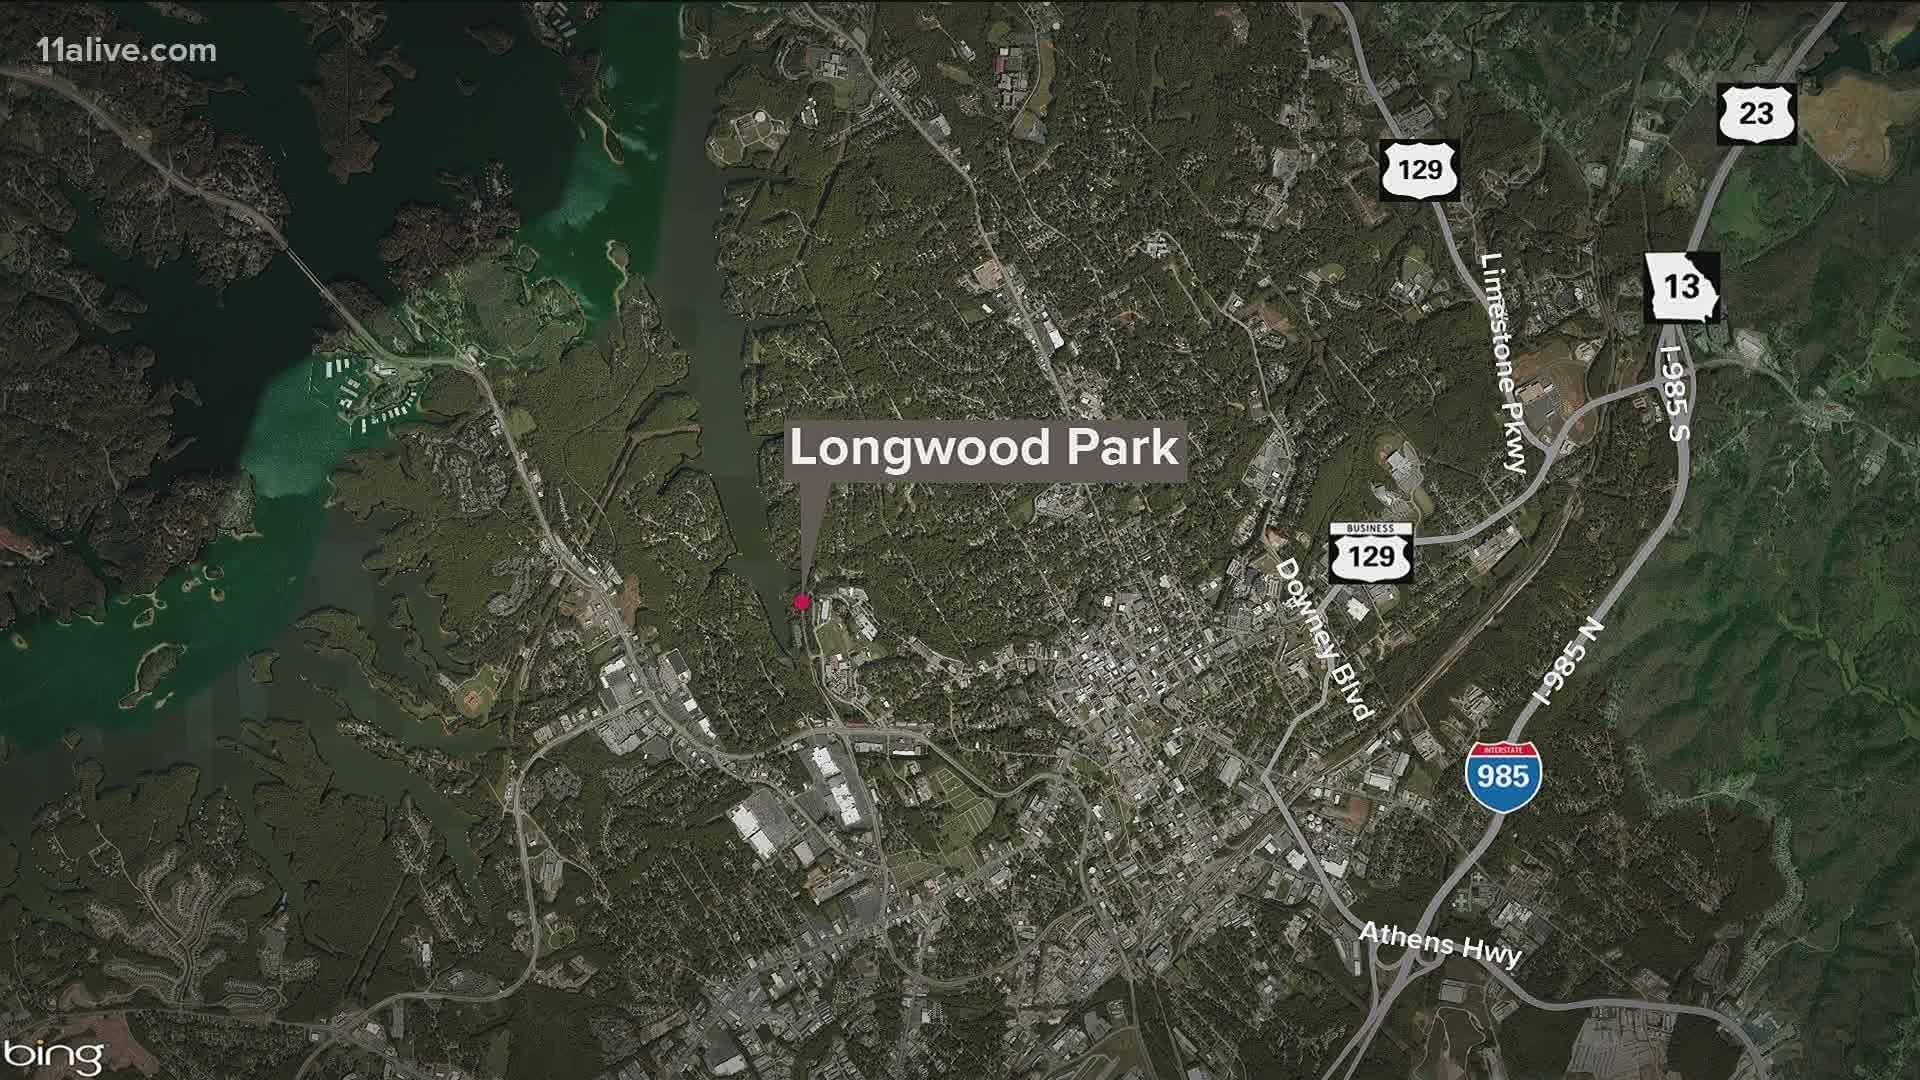 The 19-year-old went under while swimming in the Longwood Park area of the lake on Sunday afternoon.